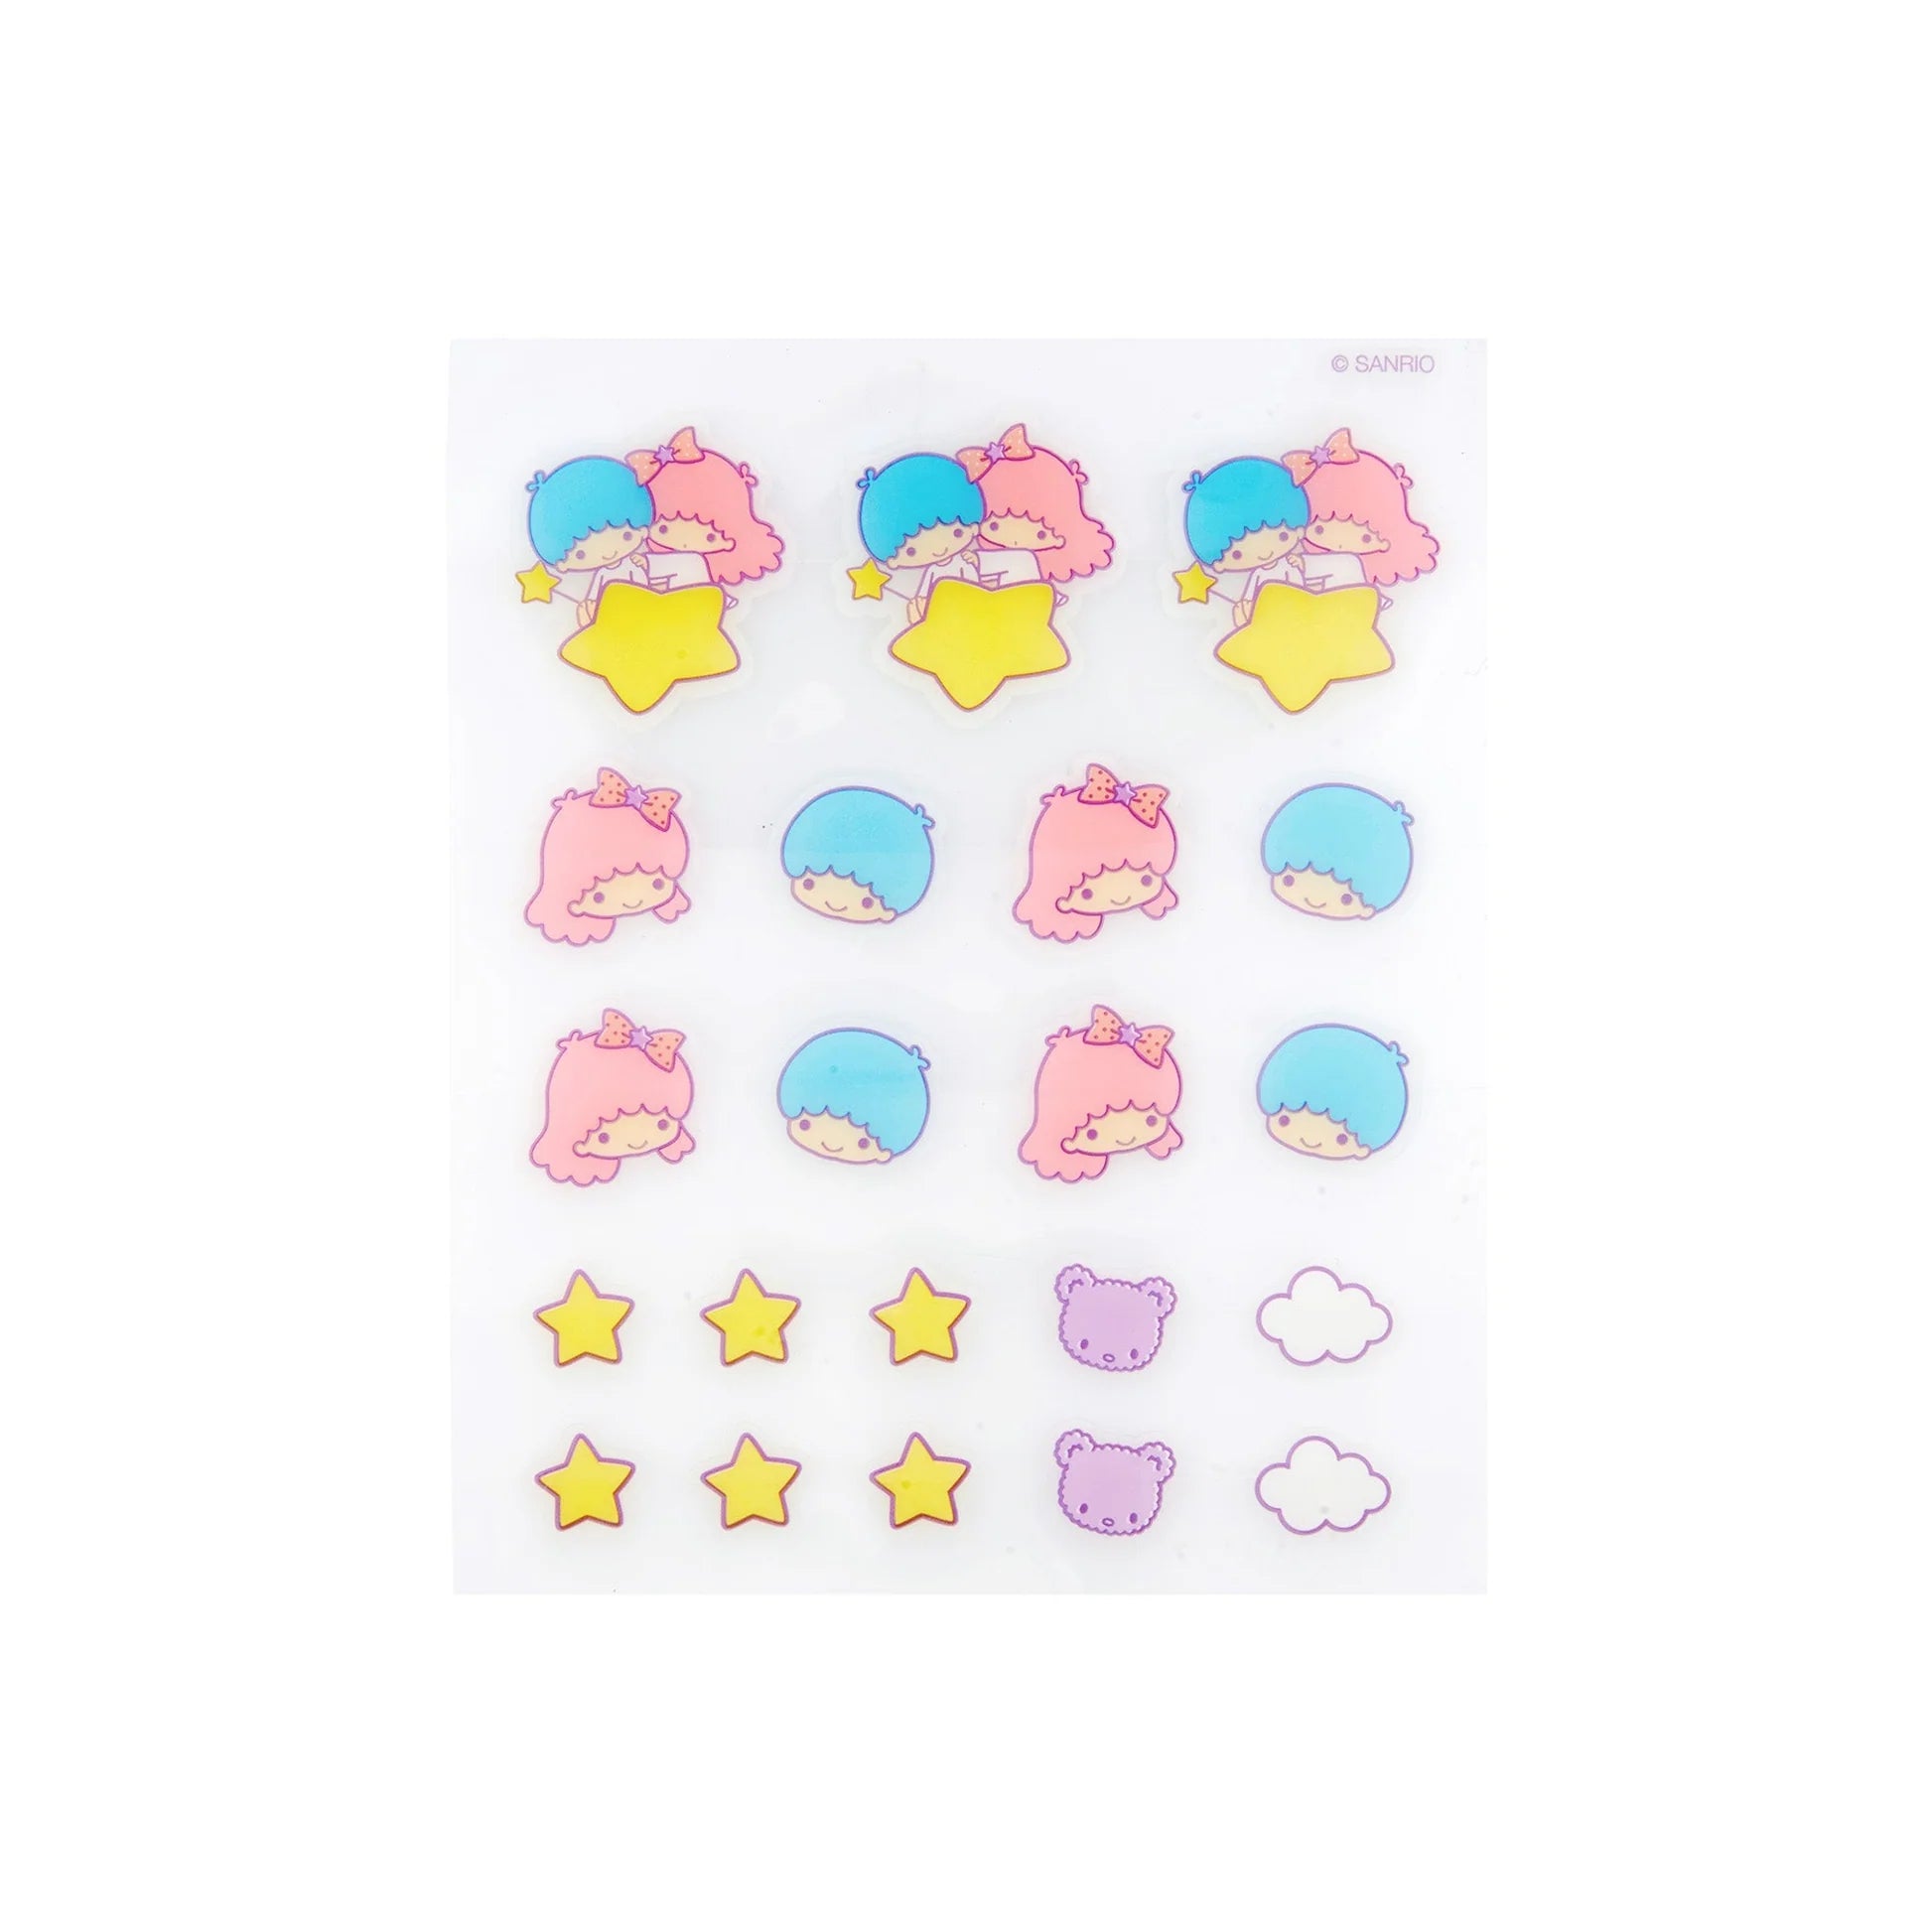 The Crème Shop x Sanrio Little Twin Stars Angel Baby Skin Hydrocolloid Blemish Patches Beauty The Creme Shop   